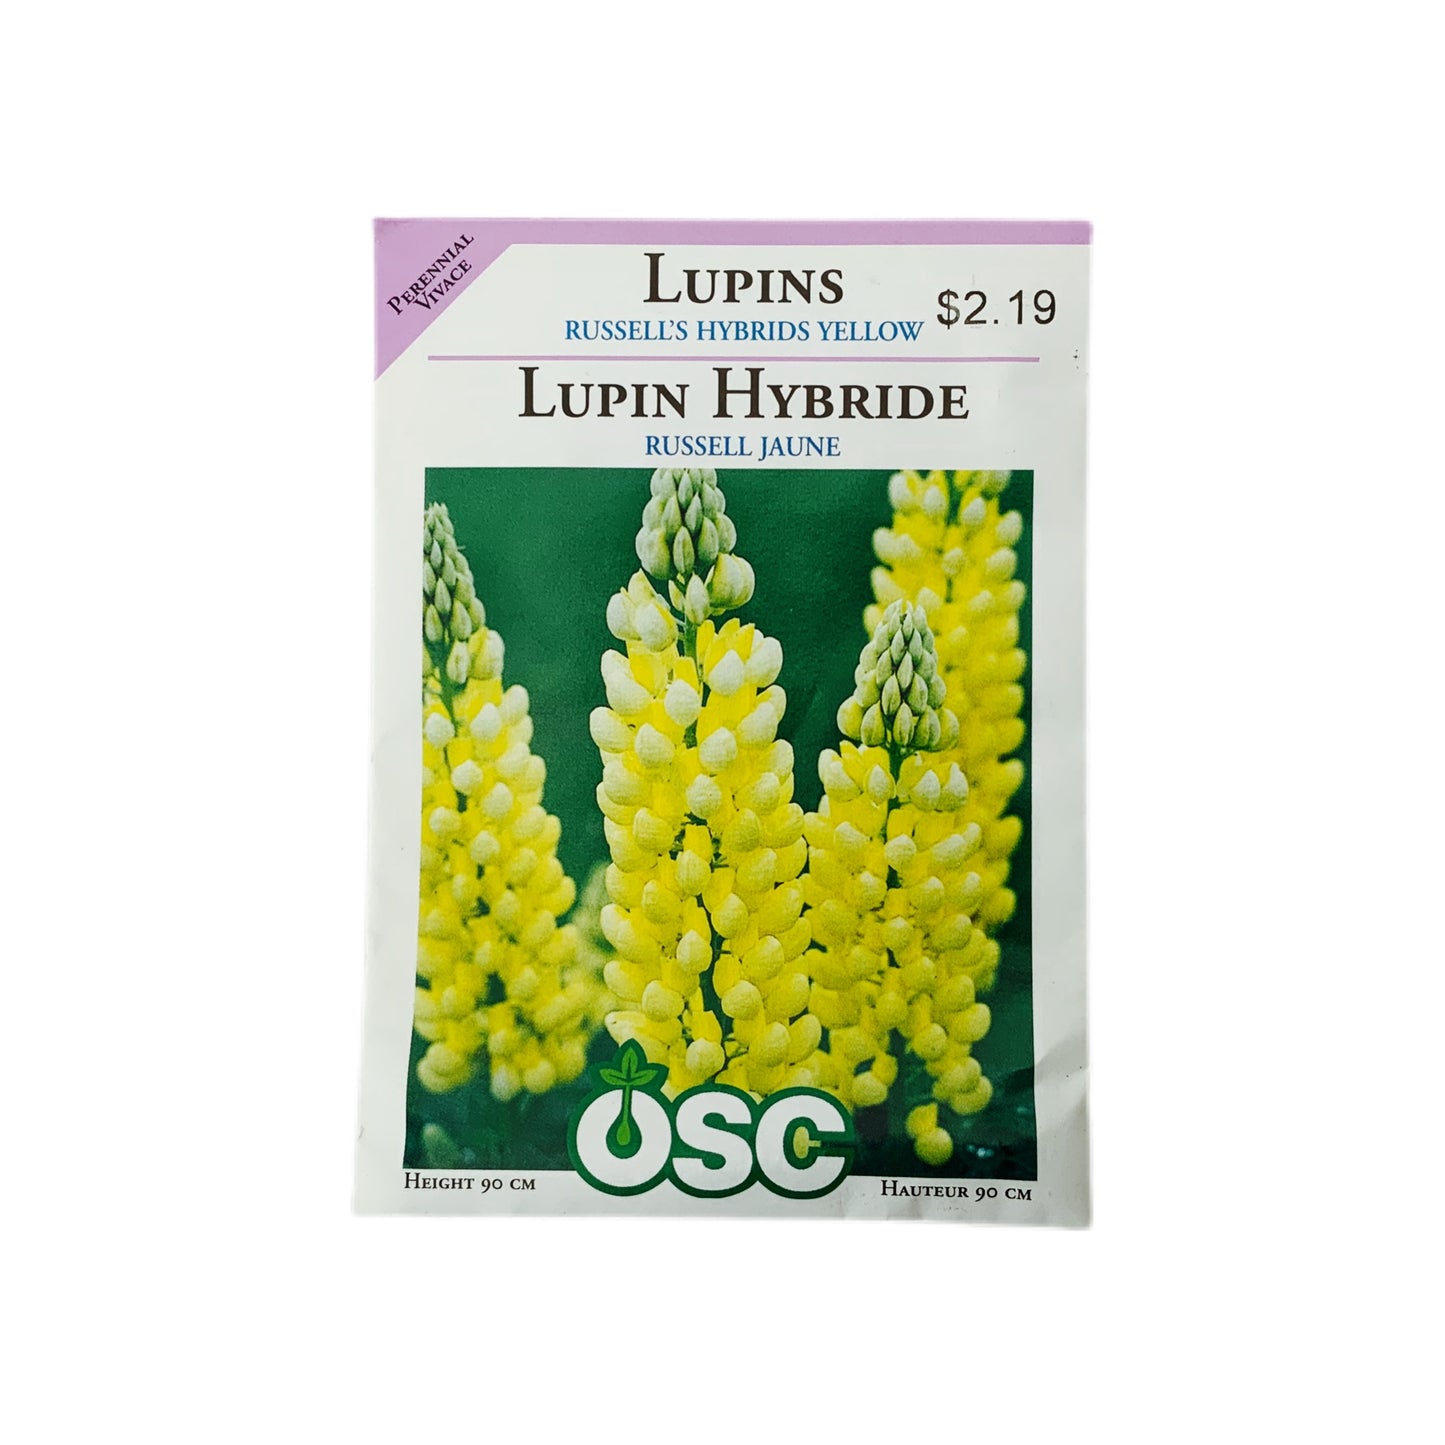 LUPINS RUSSELL'S HYBRIDS YELLOW - SEED